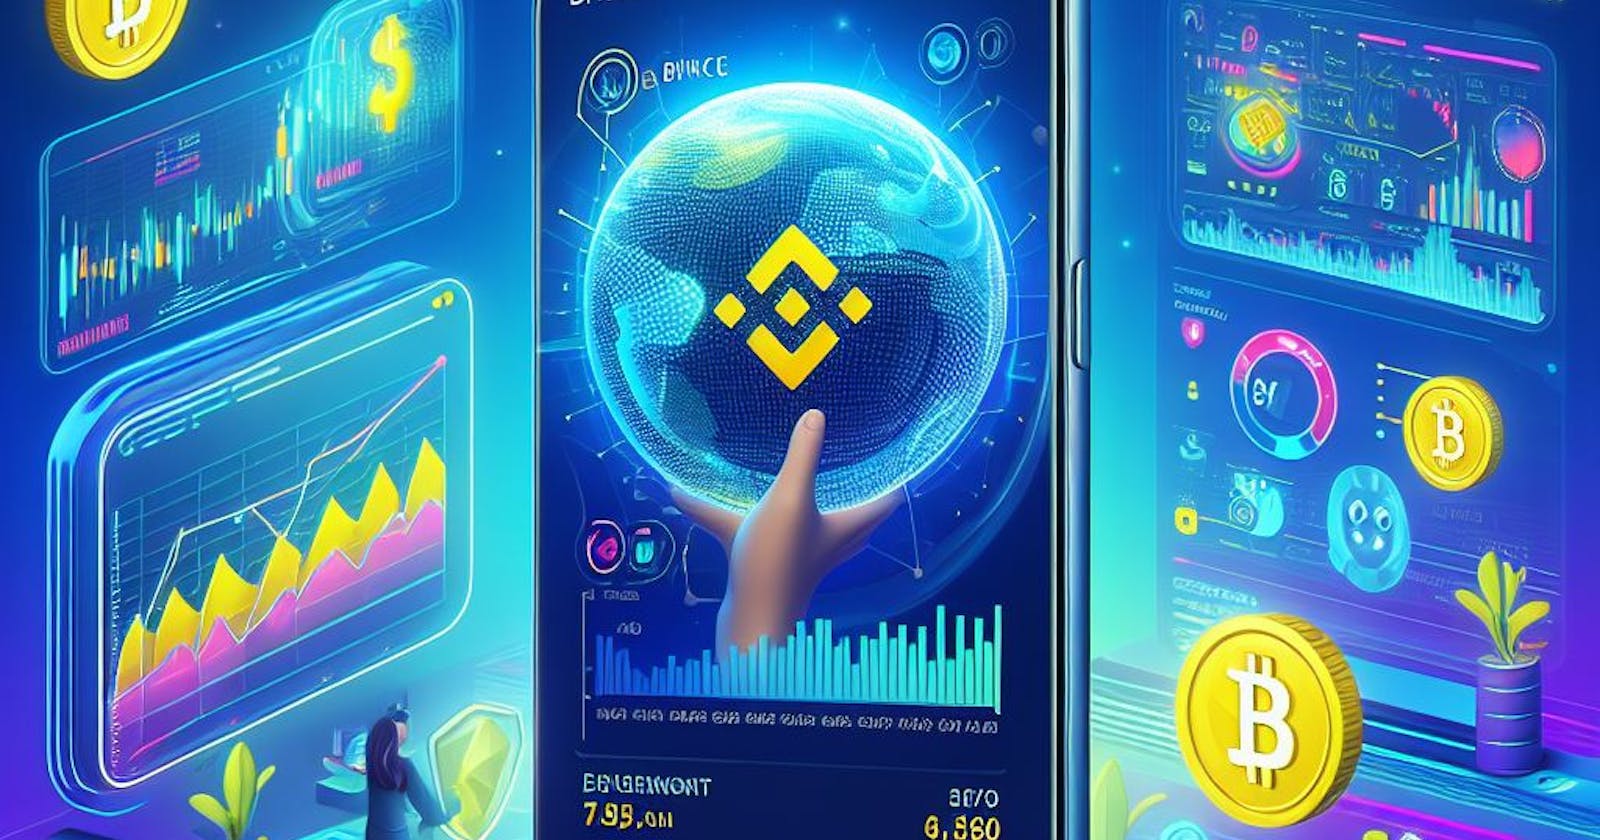 Binance Clone App: How To Maximize Your Crypto Startup Growth?